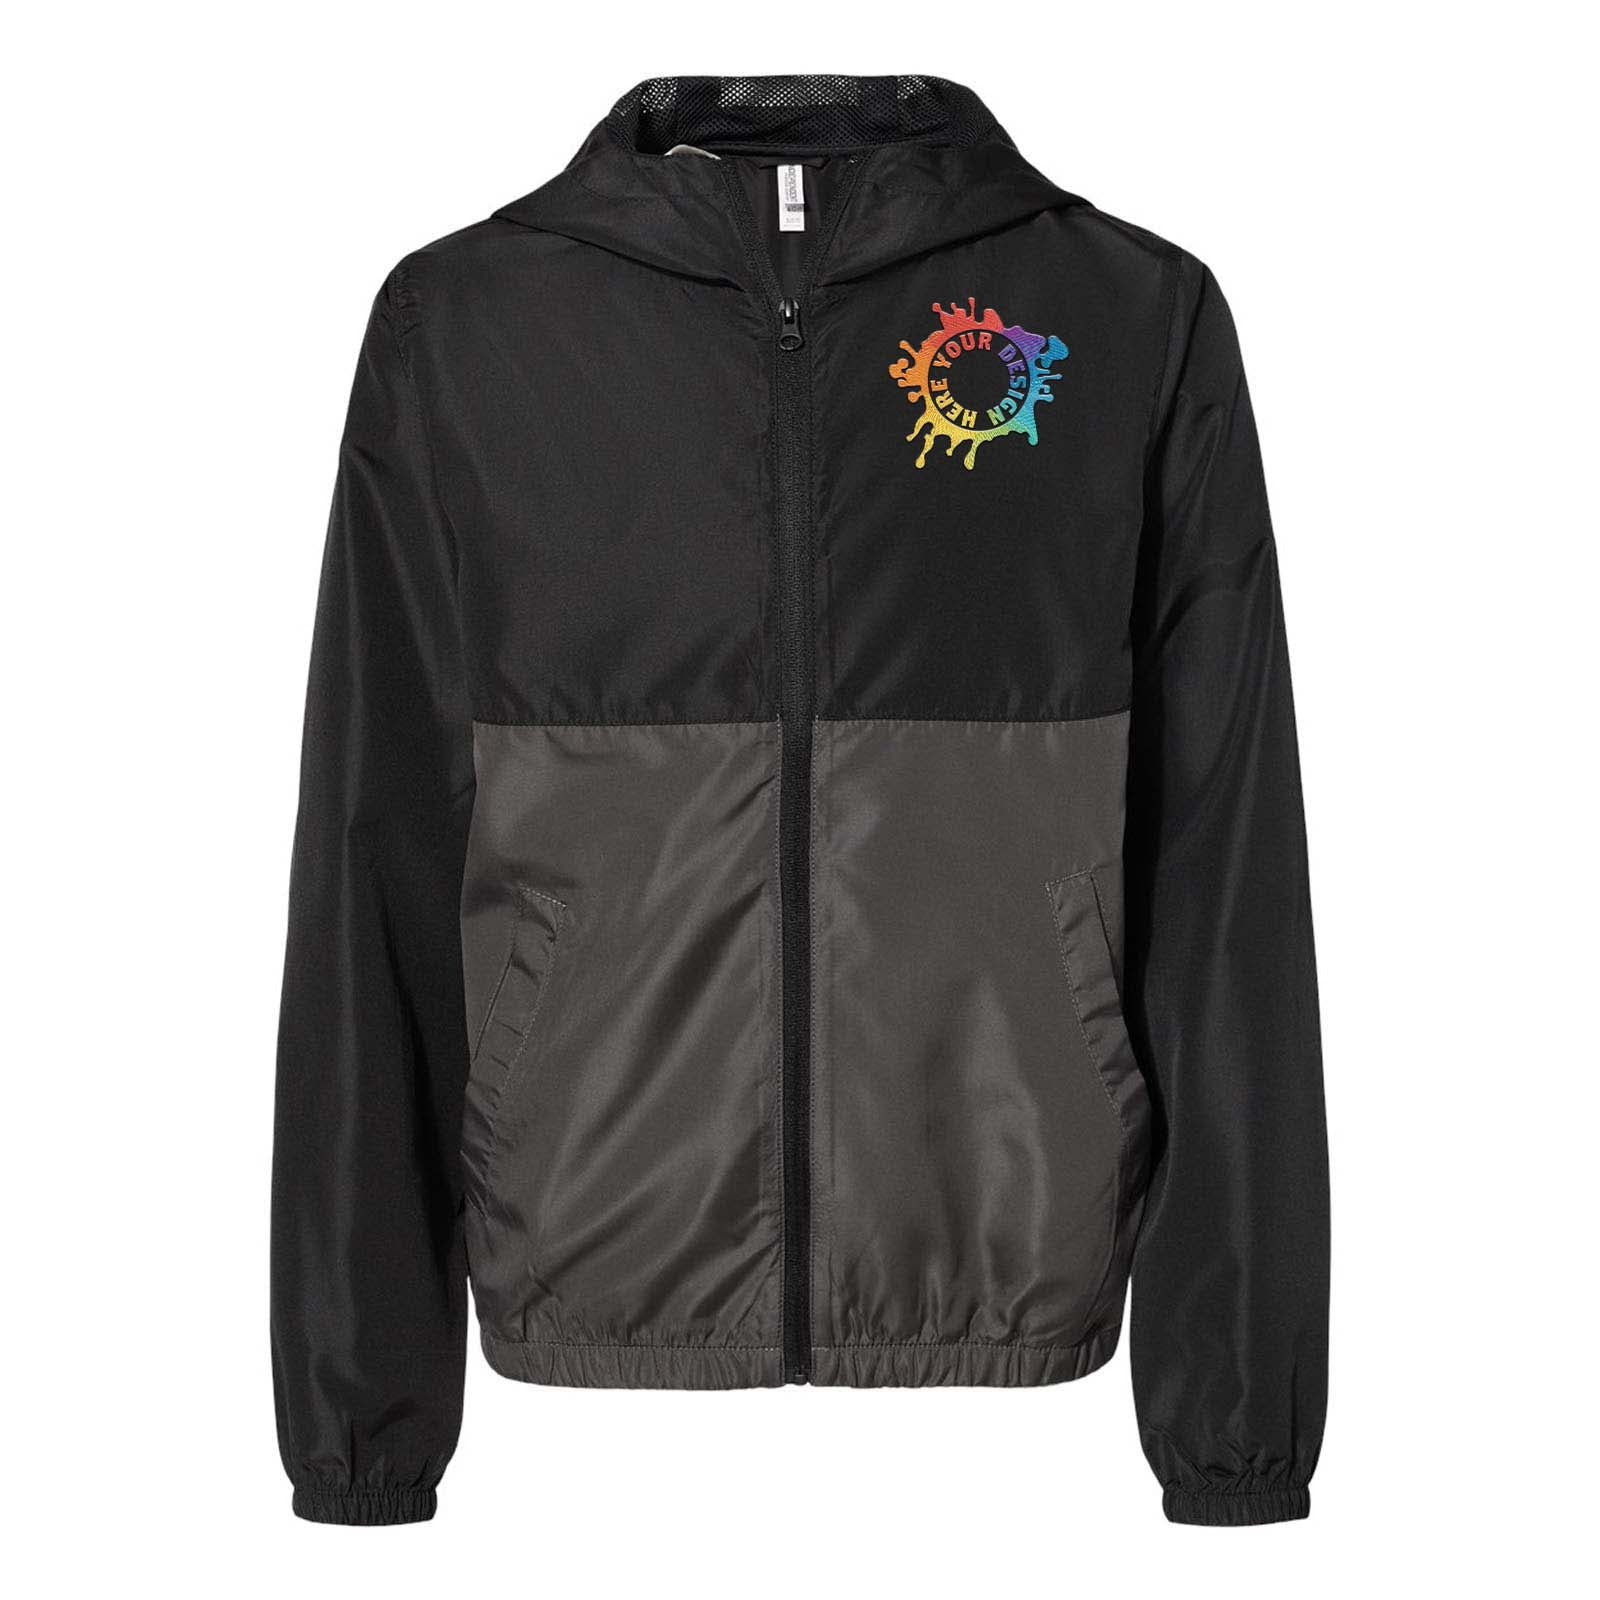 Independent Trading Co. - Youth Lightweight Windbreaker Full-Zip Jacket Embroidery - Mato & Hash